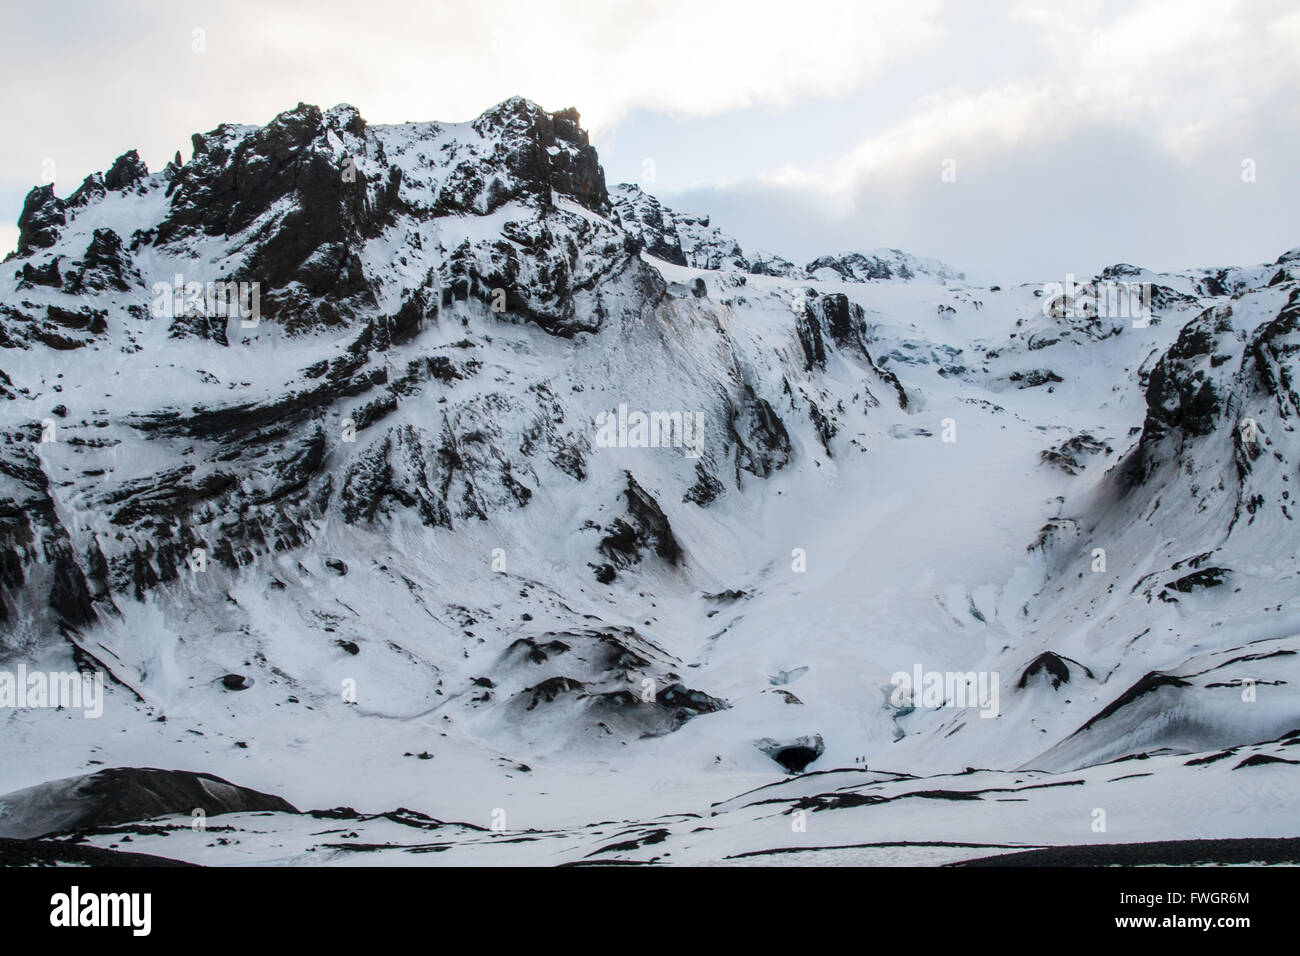 Finger glacier covered in snow, surrounded by mountains, Eyjafjallajokull volcano, Thorsmork, Iceland Stock Photo